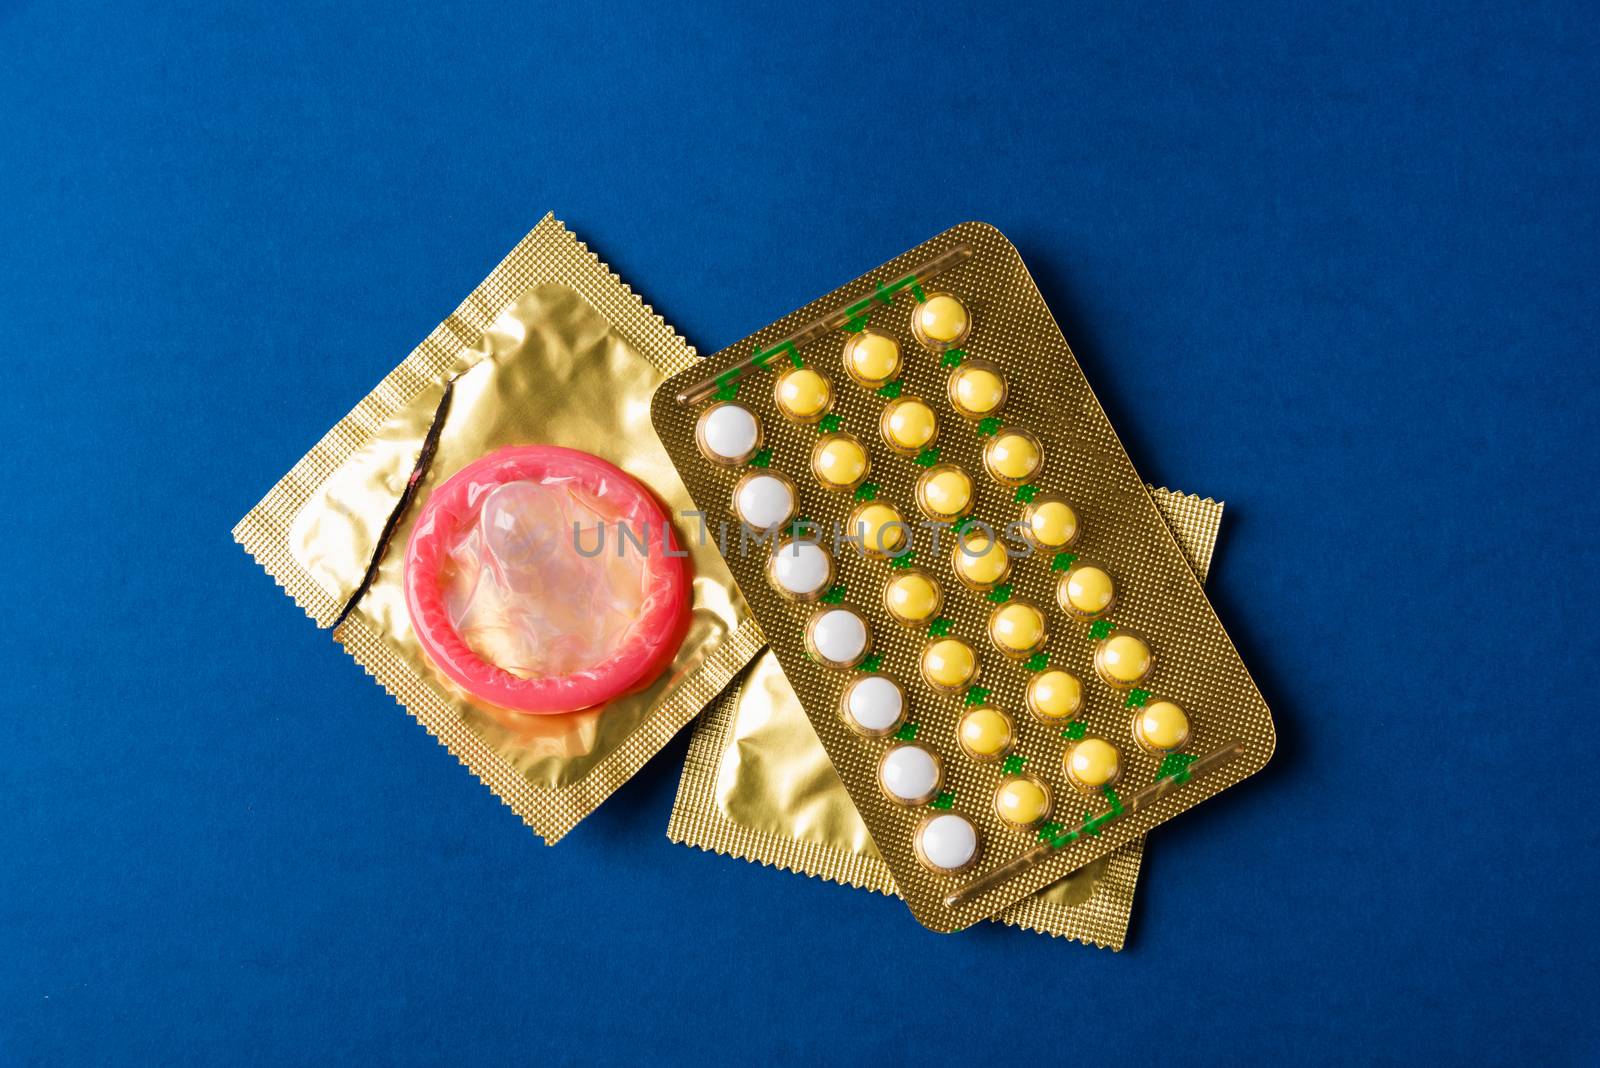 condom on wrapper pack and contraceptive pills blister hormonal  by Sorapop